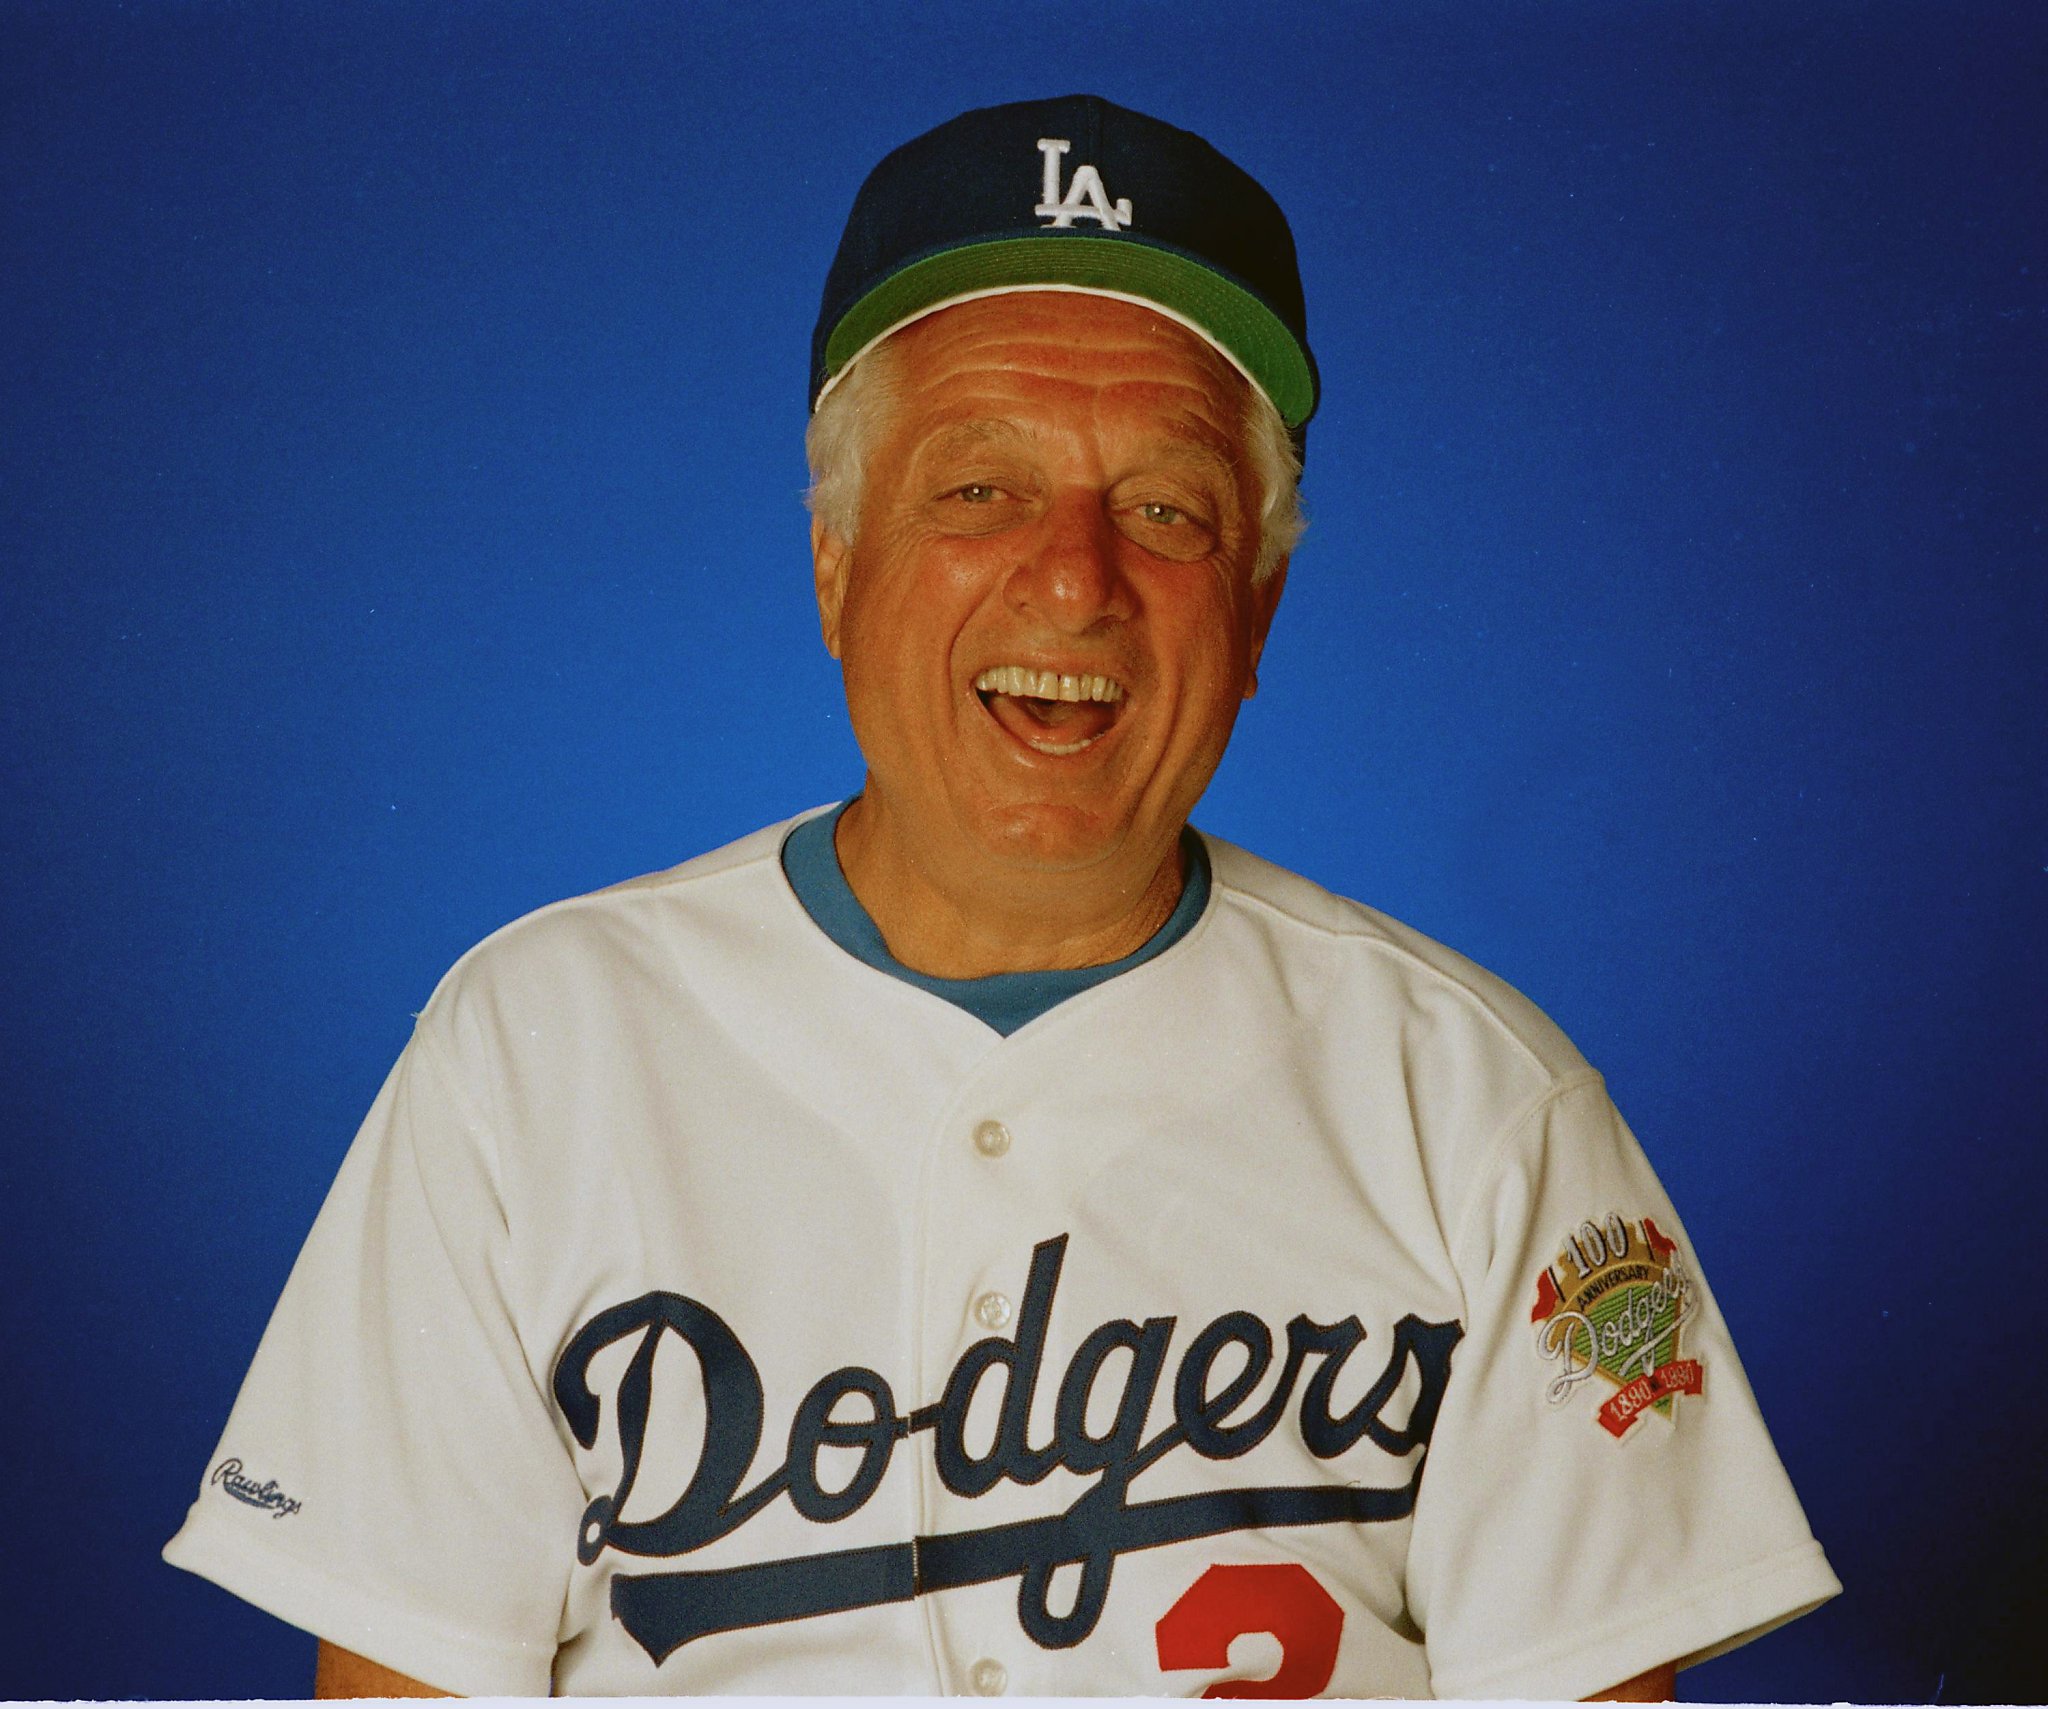 Tommy Lasorda, Fiery Hall of Fame Dodgers Manager, Dies at 93 - GV